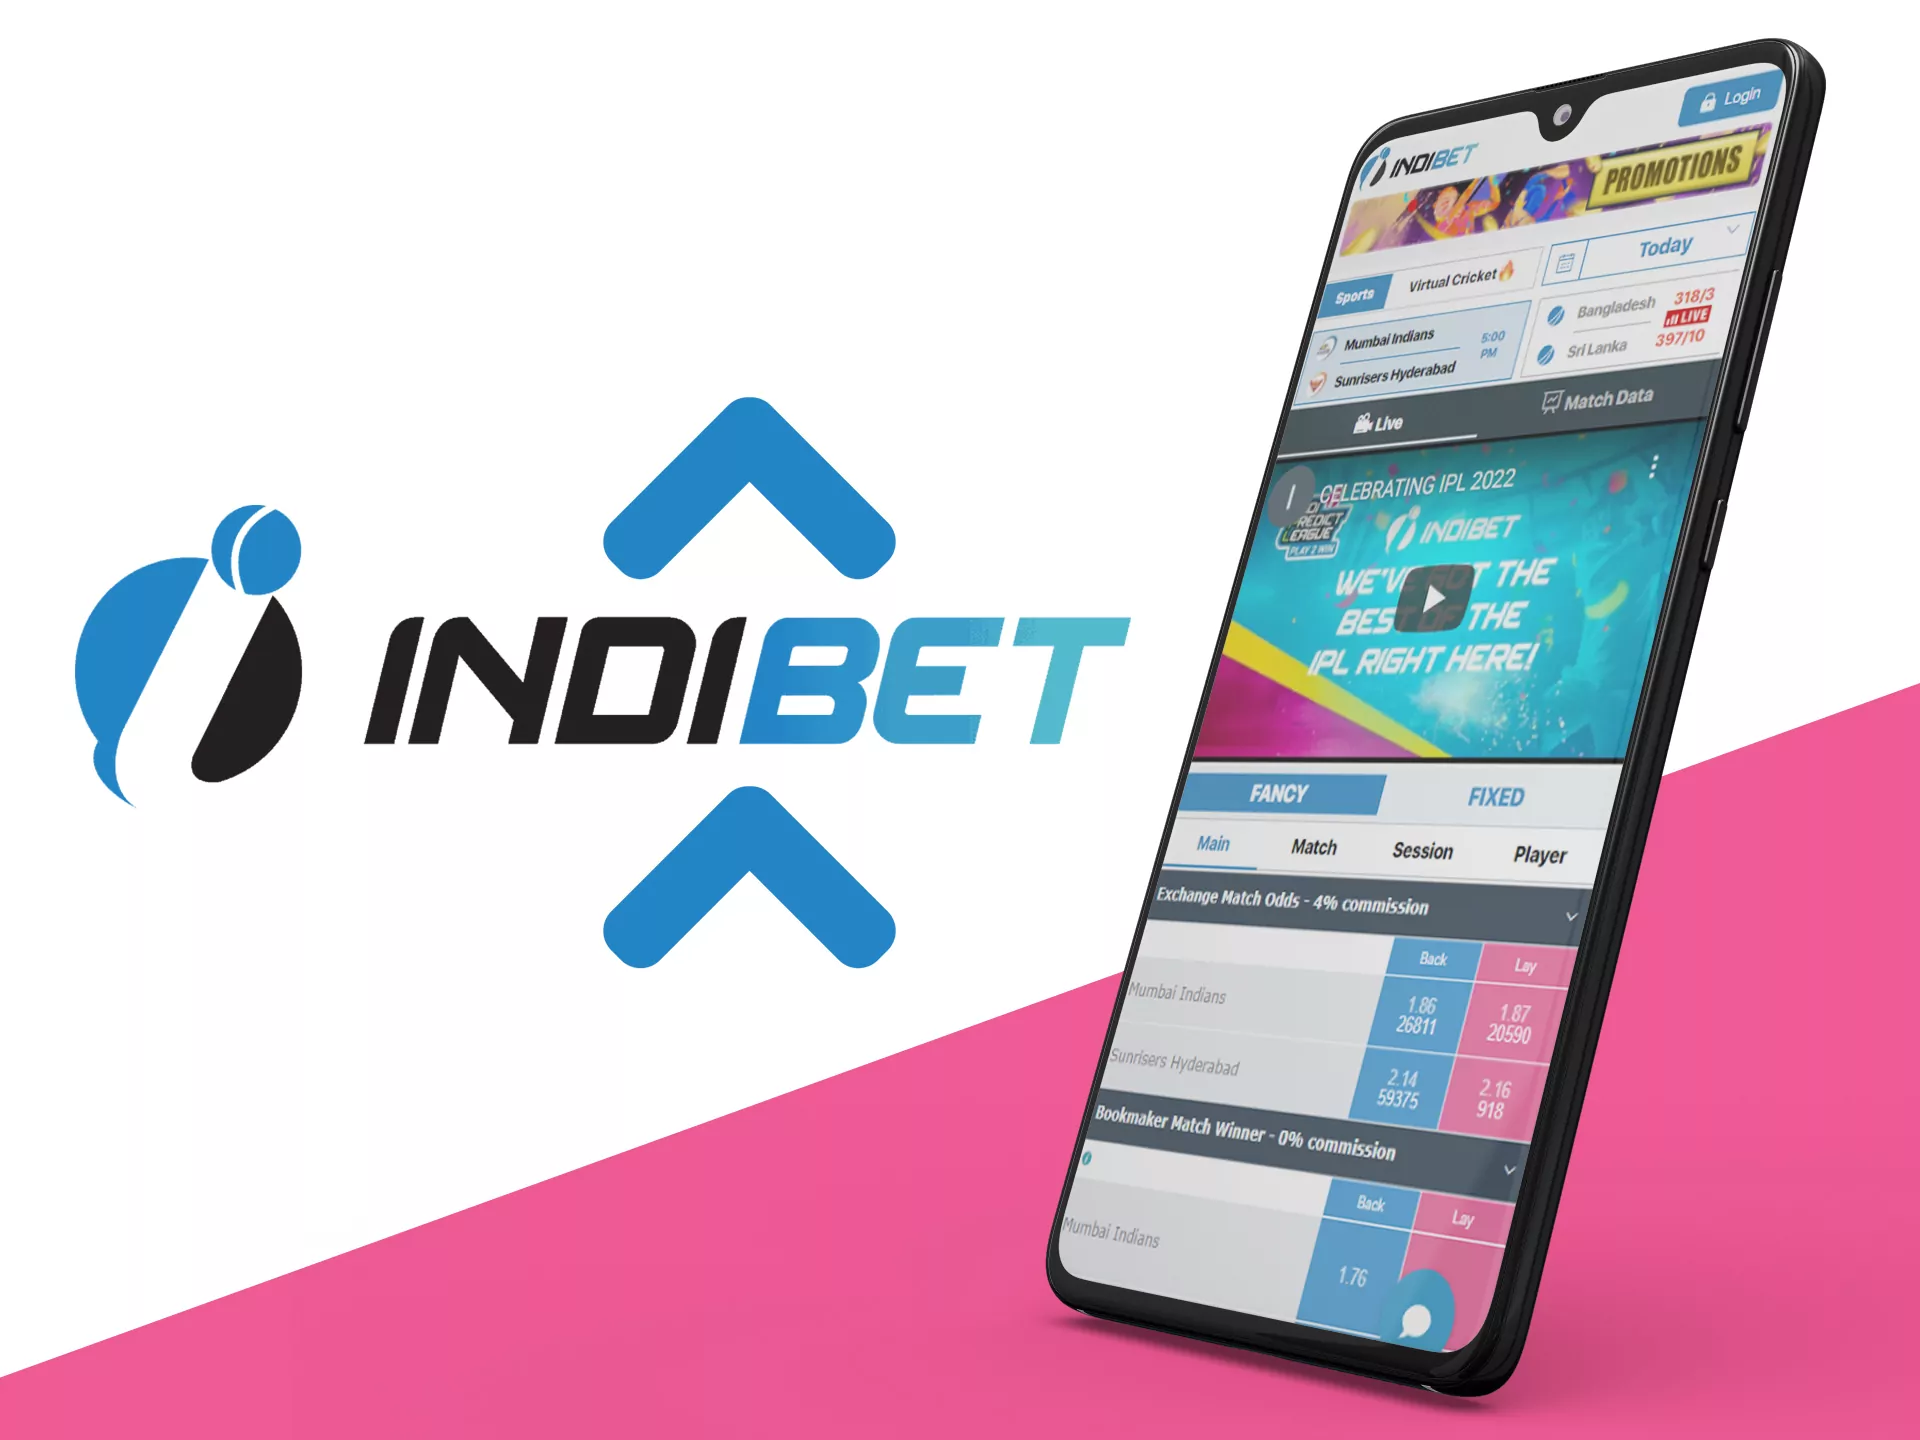 Keep Indibet app updated. If you have any problems with the app, delete it and download again.